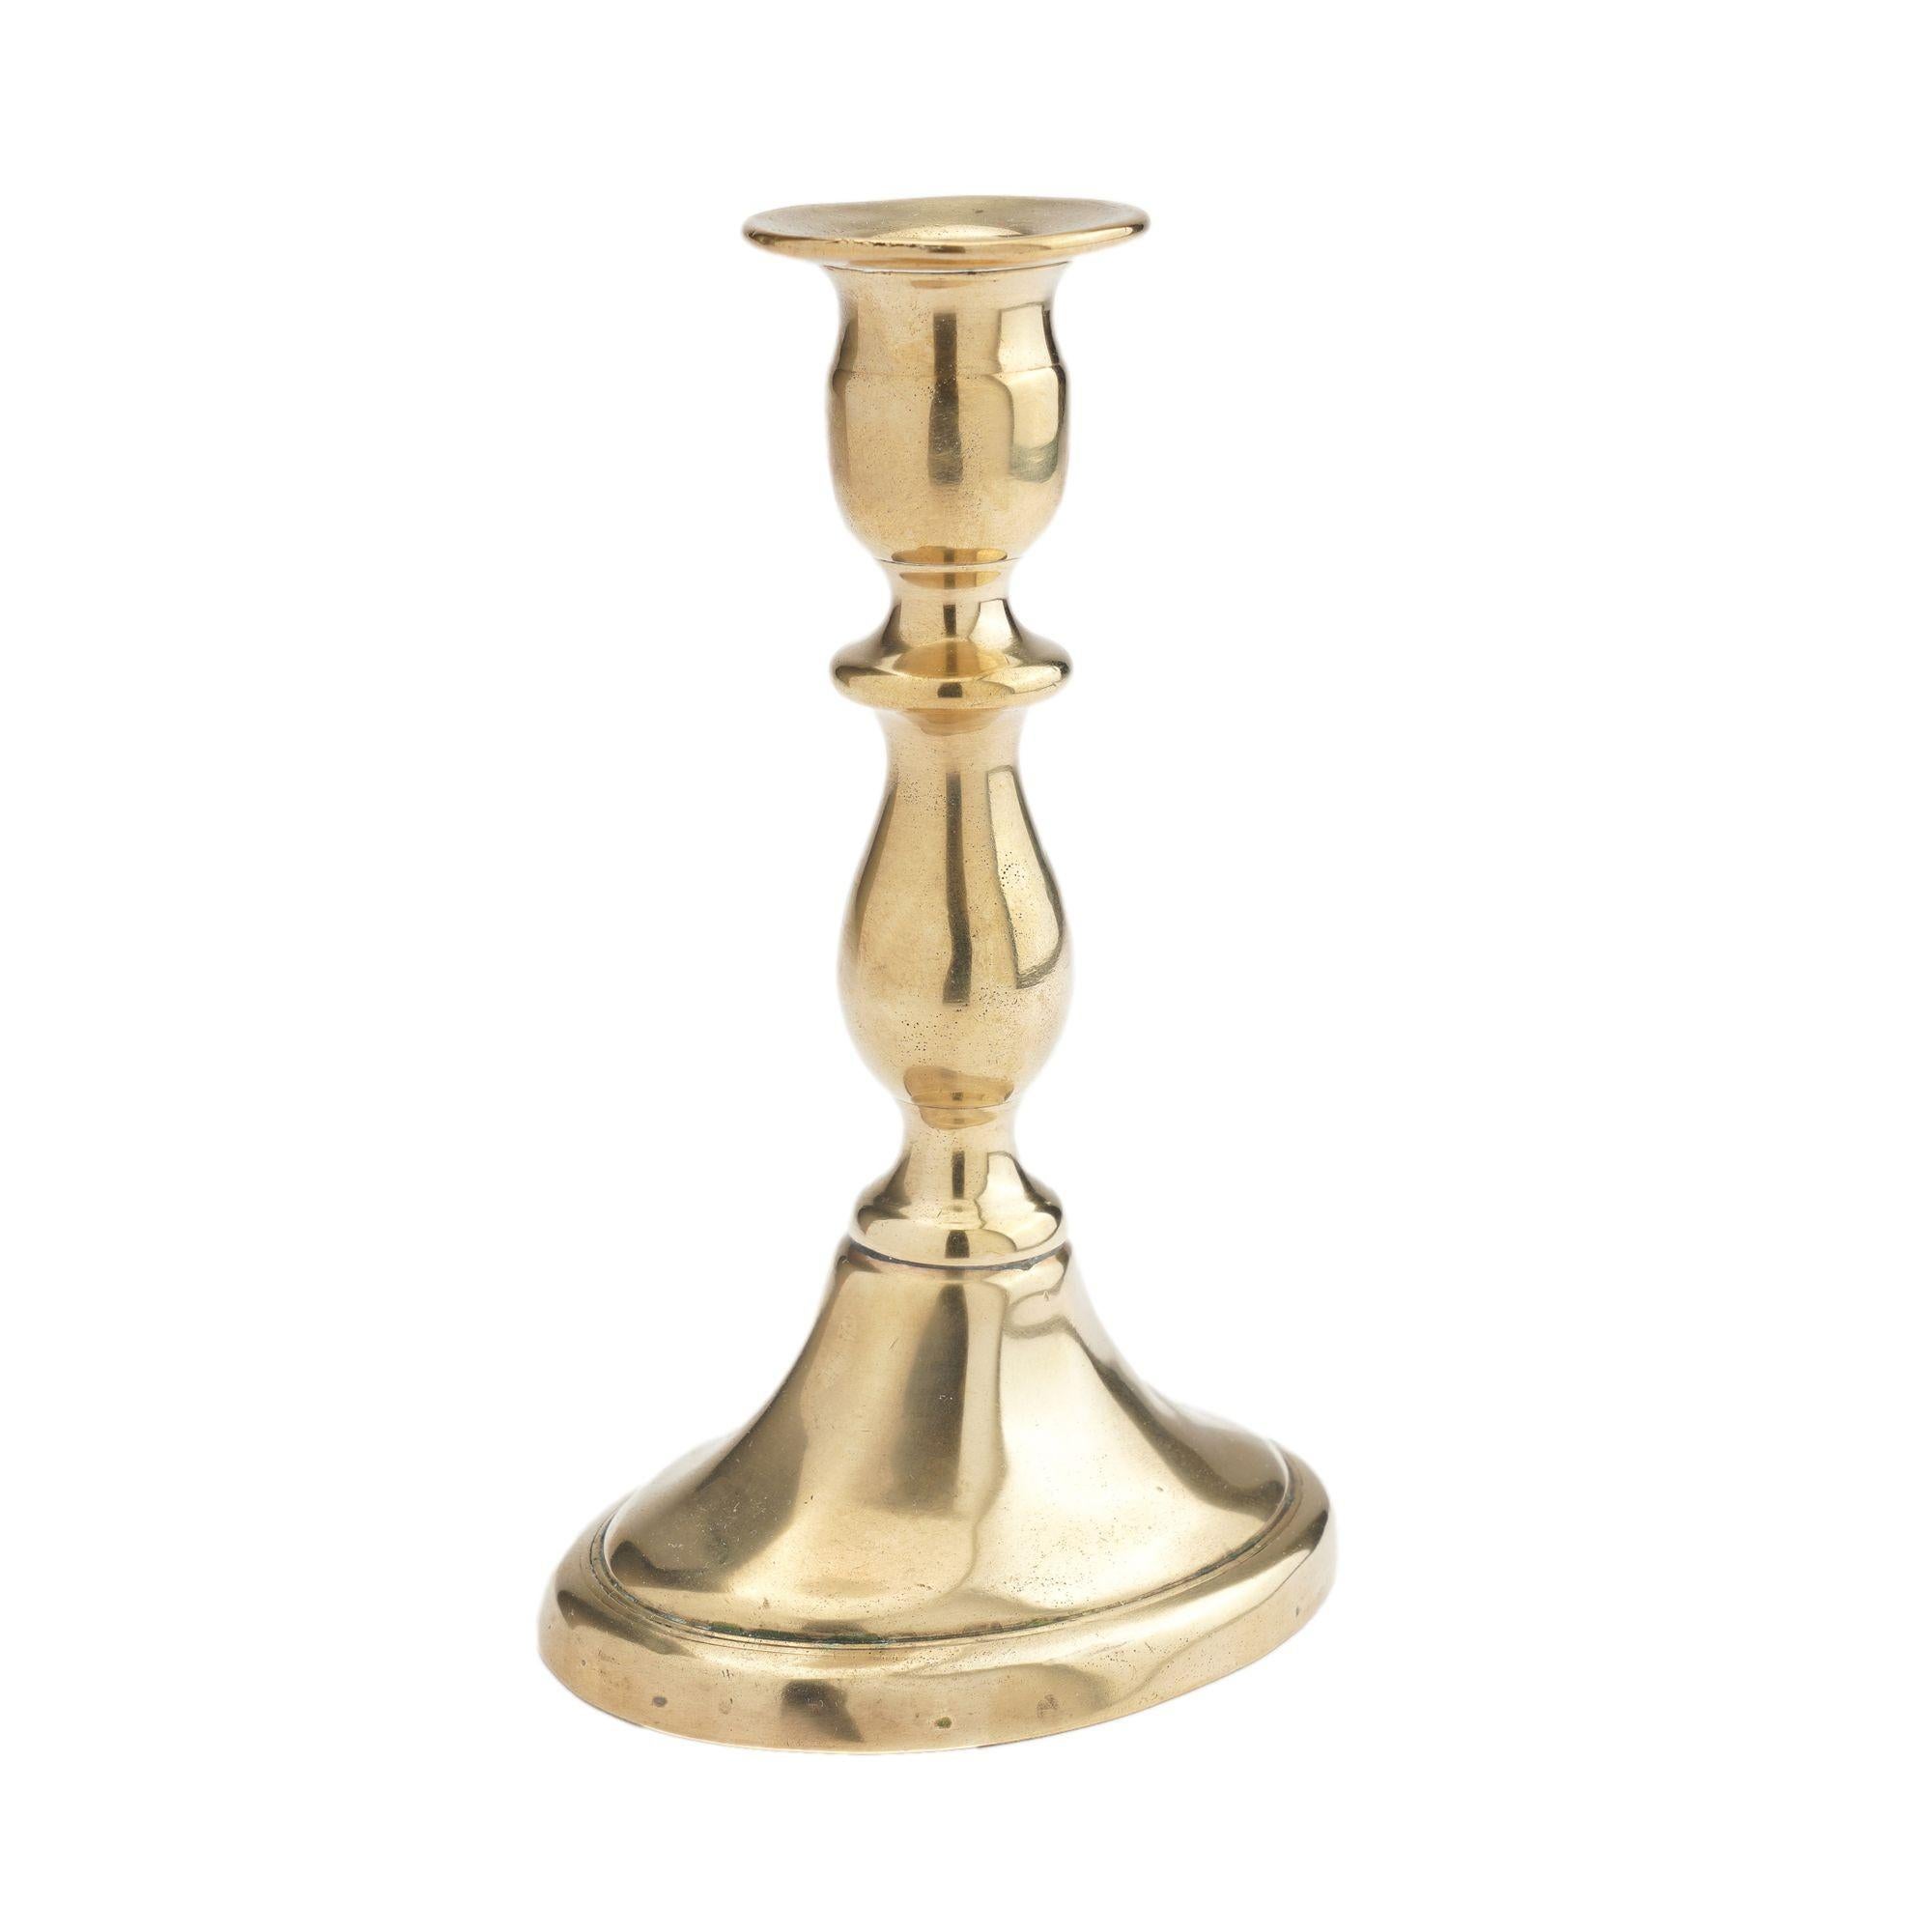 English cast brass oval base candlestick by William A. Harrison, 1791-1818 For Sale 3